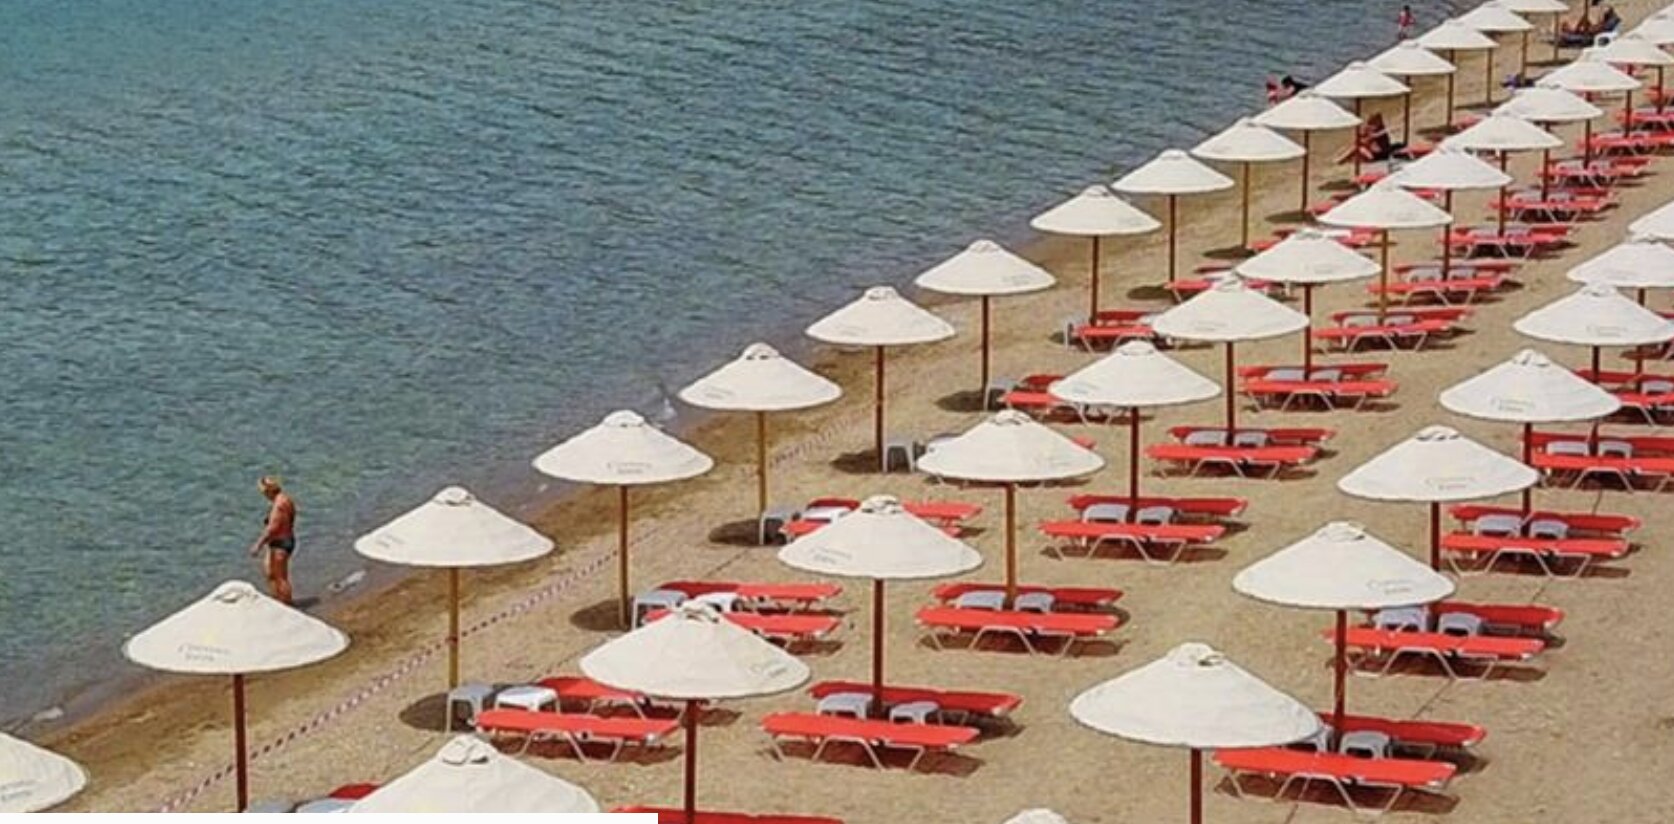 Crowds flock to the beach as heatwave hits Greece